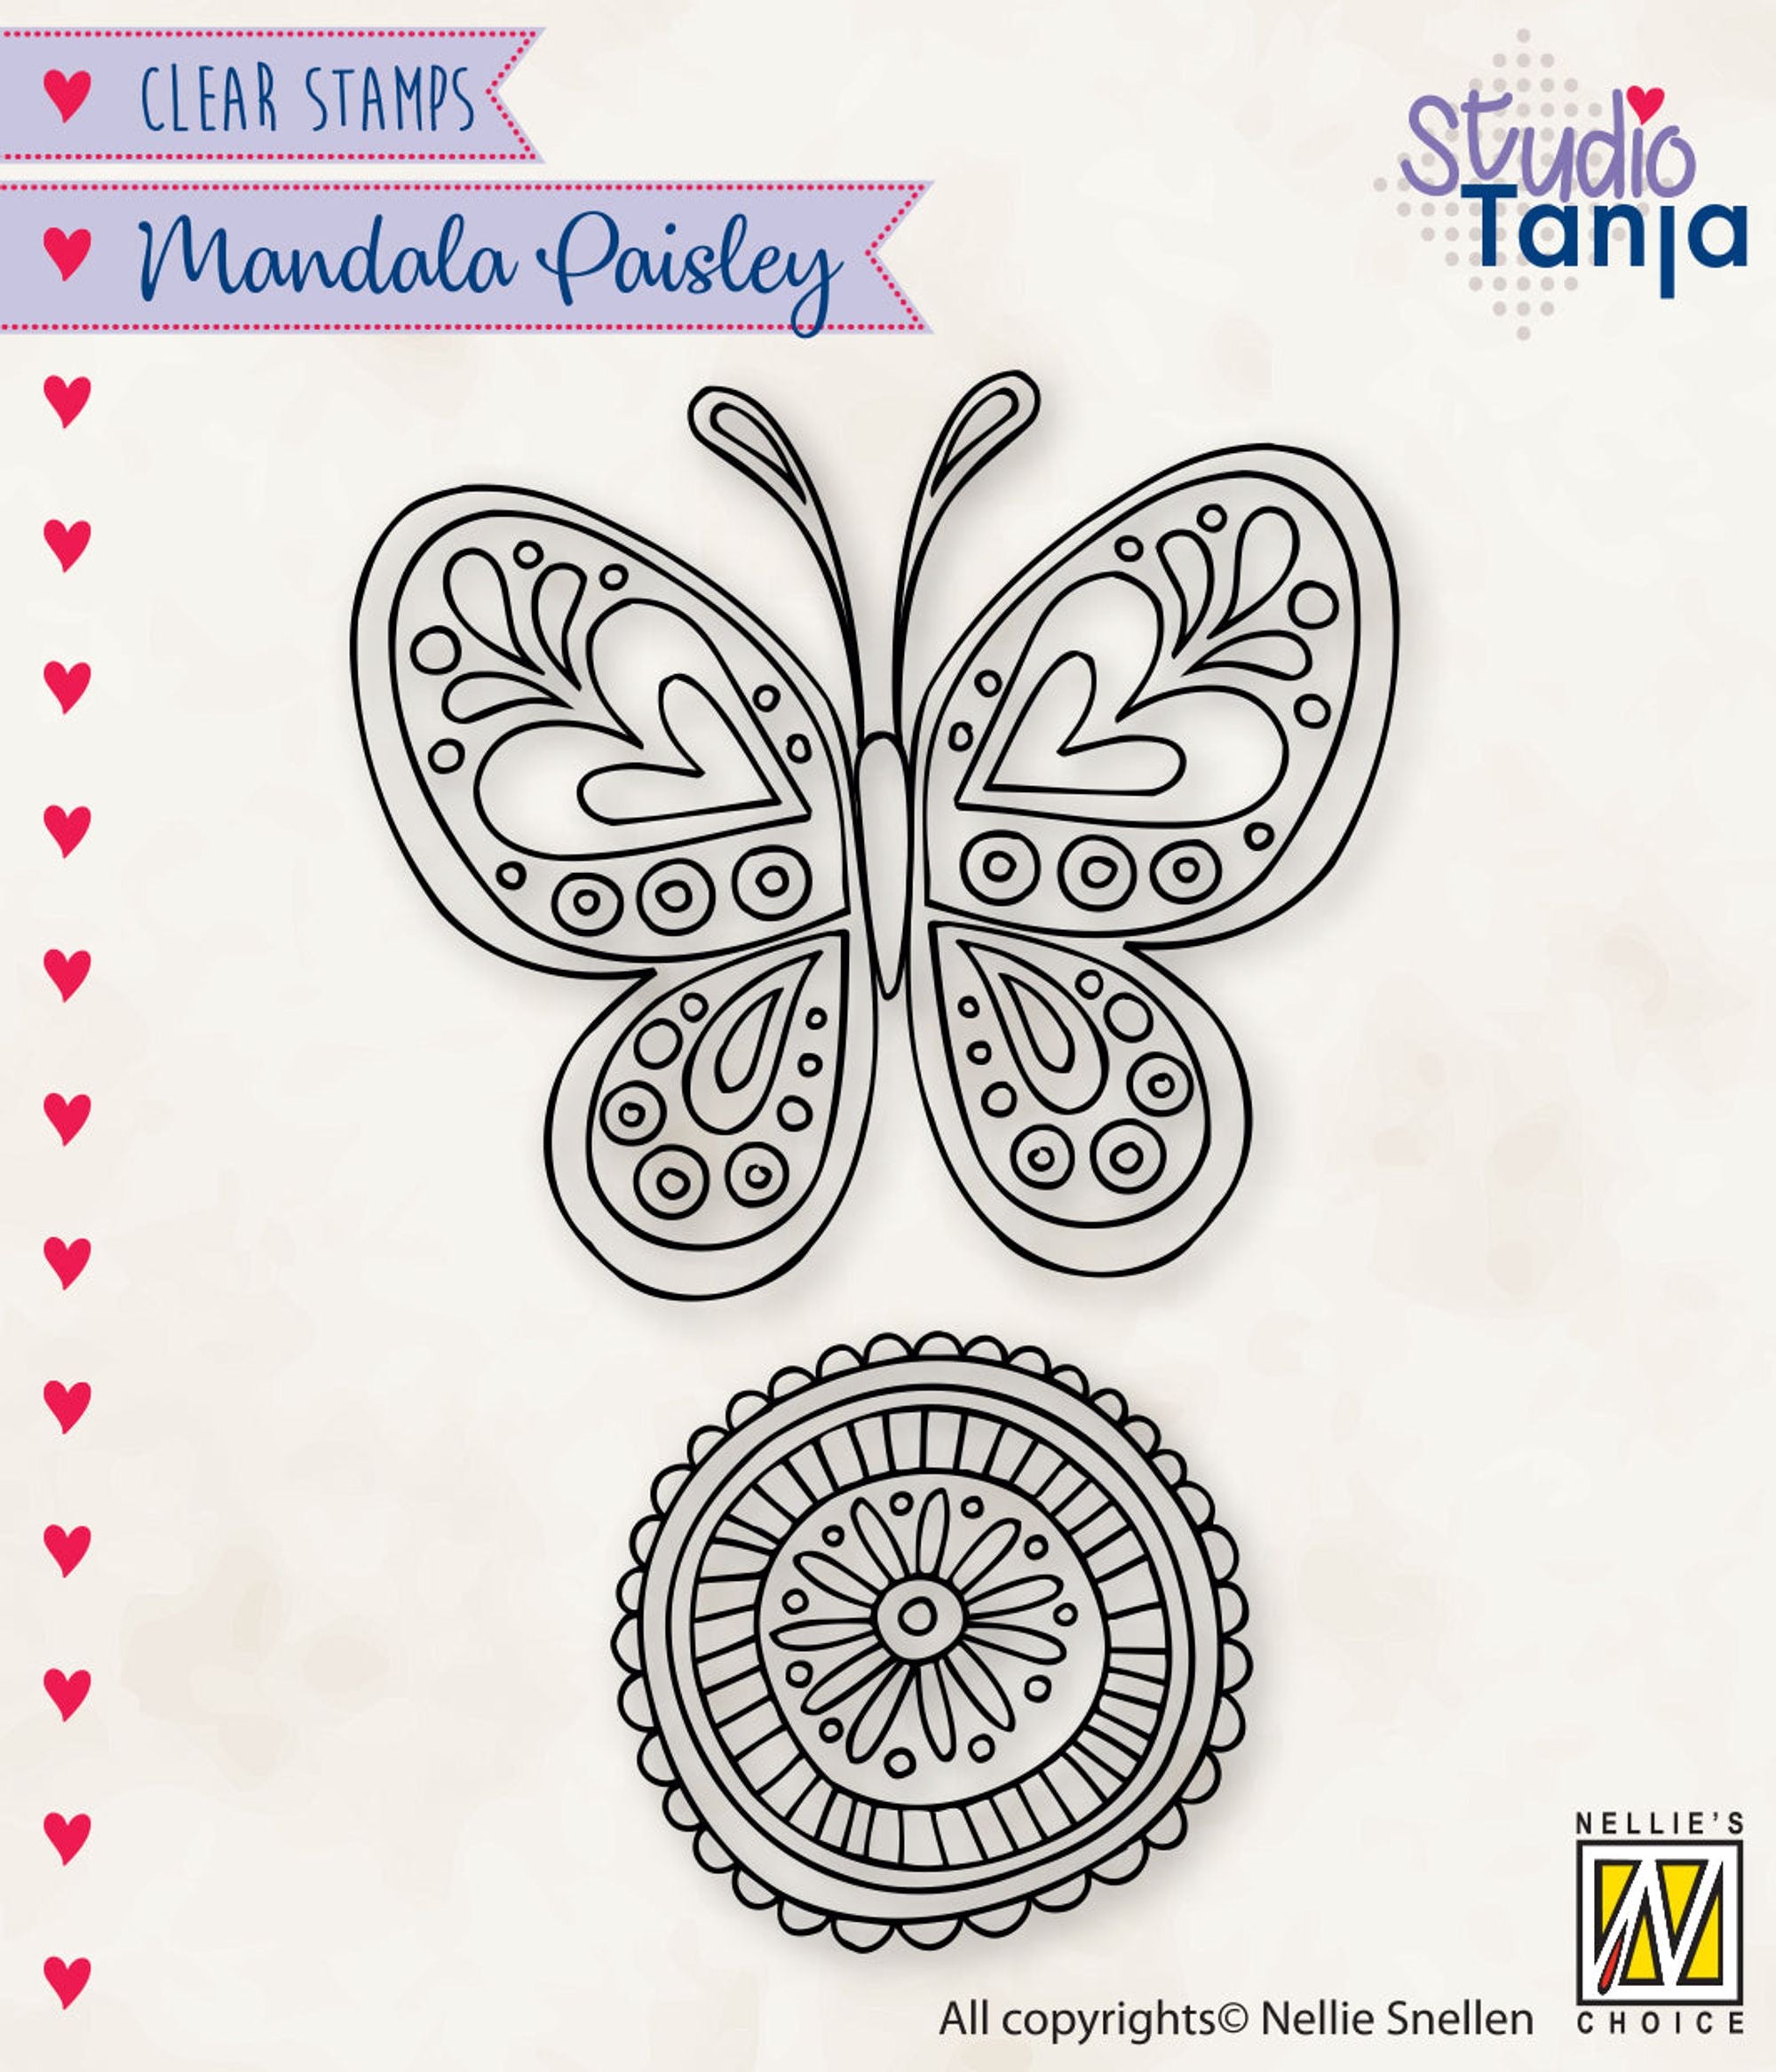 Nellie's Choice Clear Stamp Mandalas Paisley Butterfly